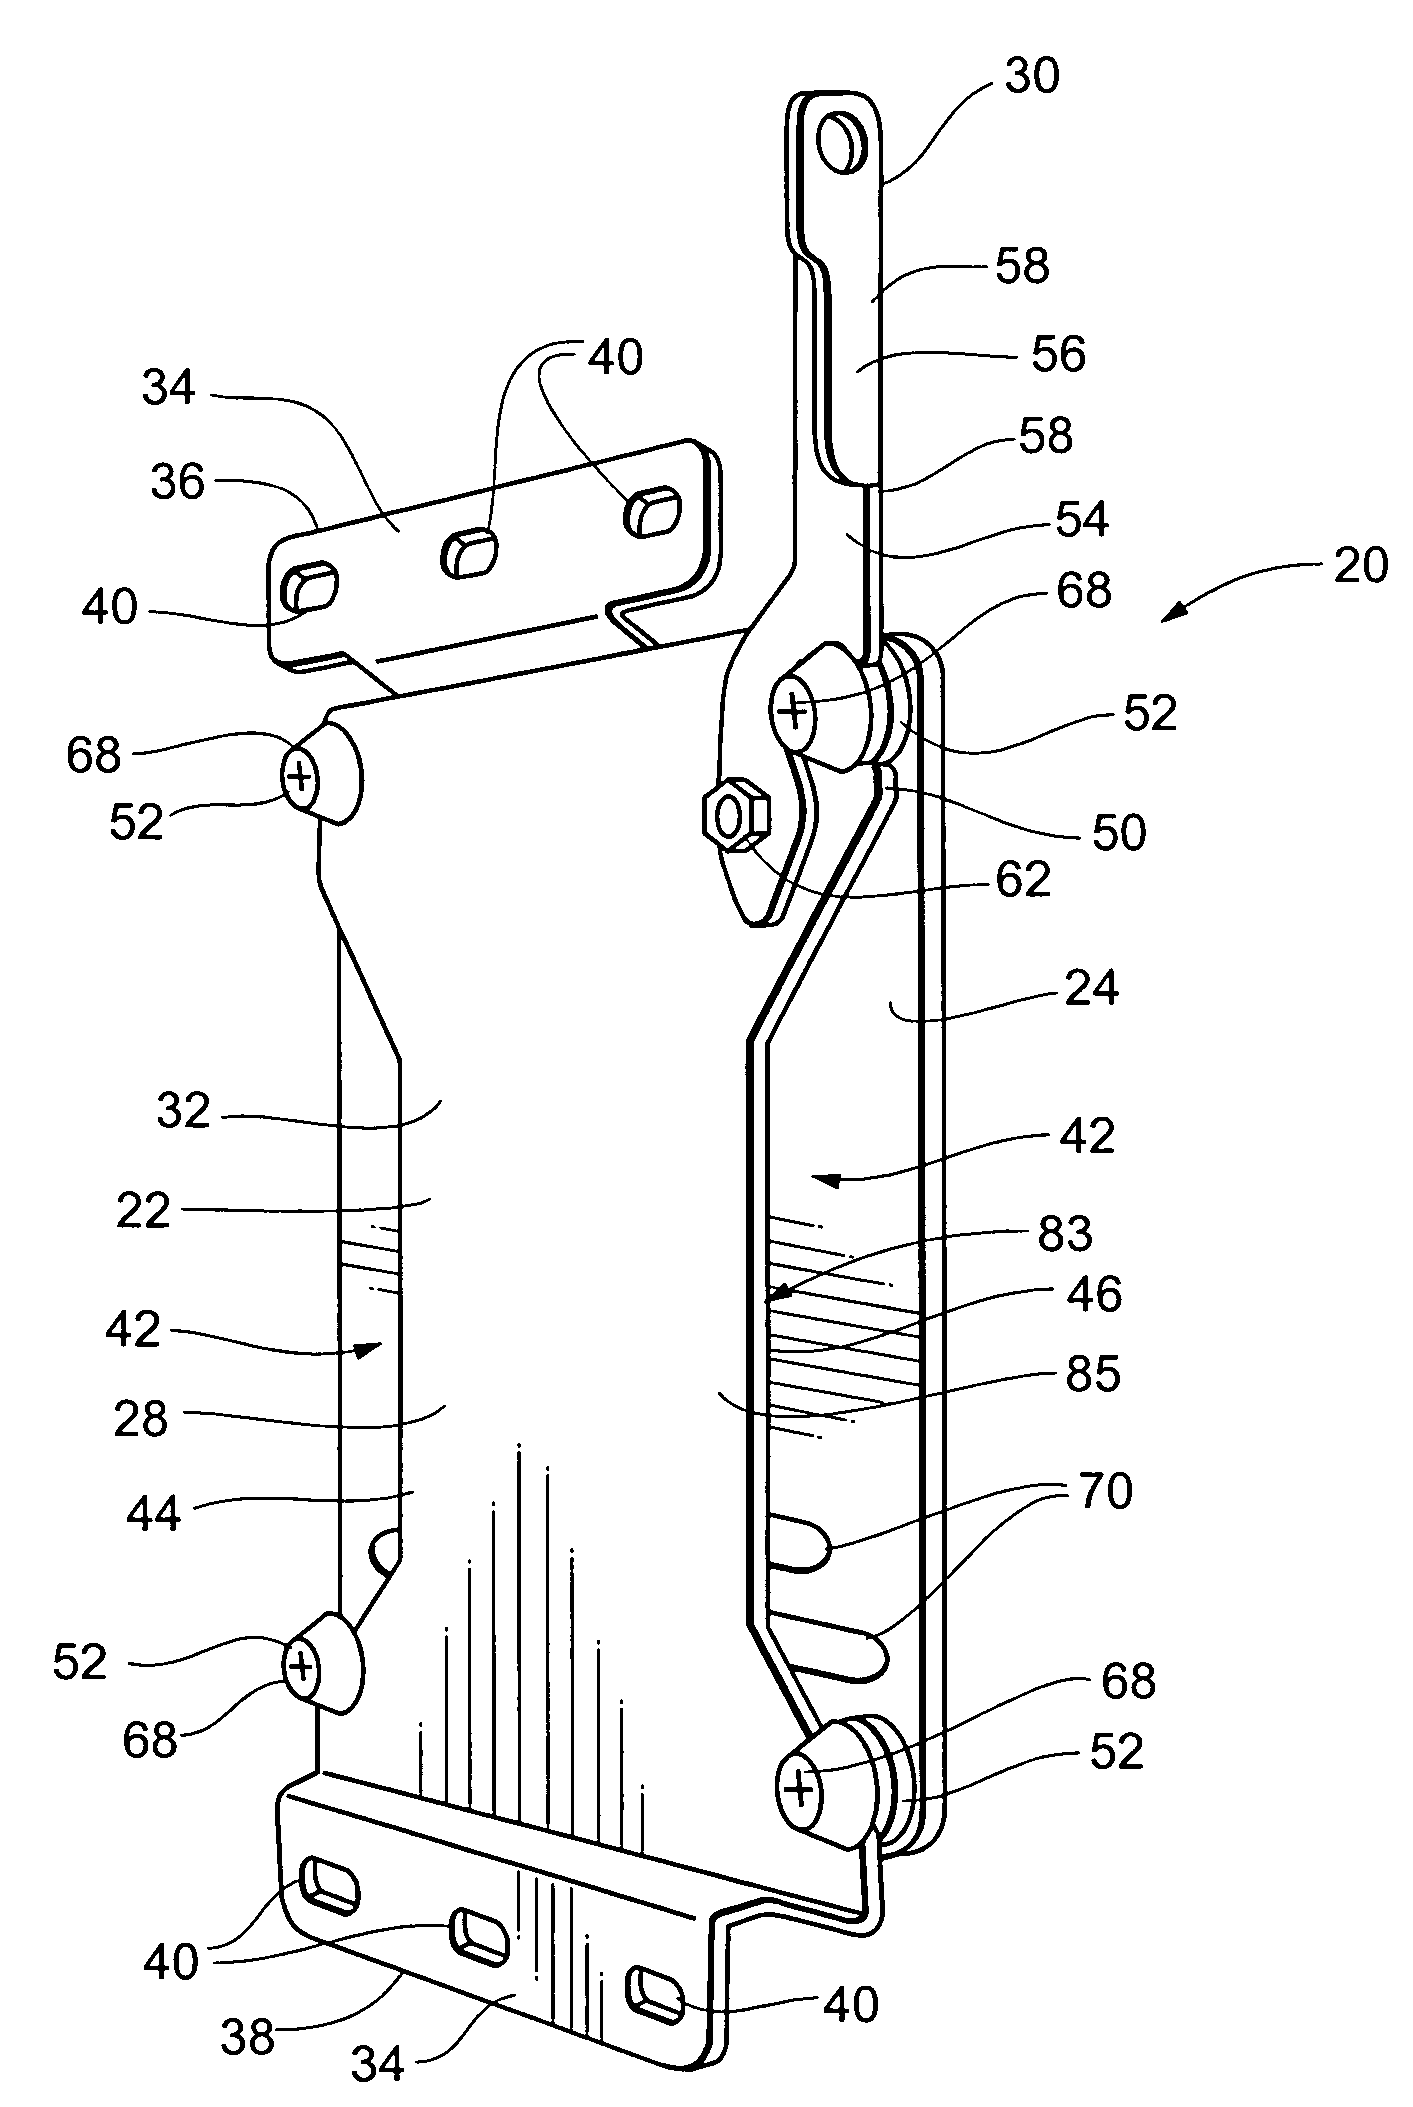 Display mounting device